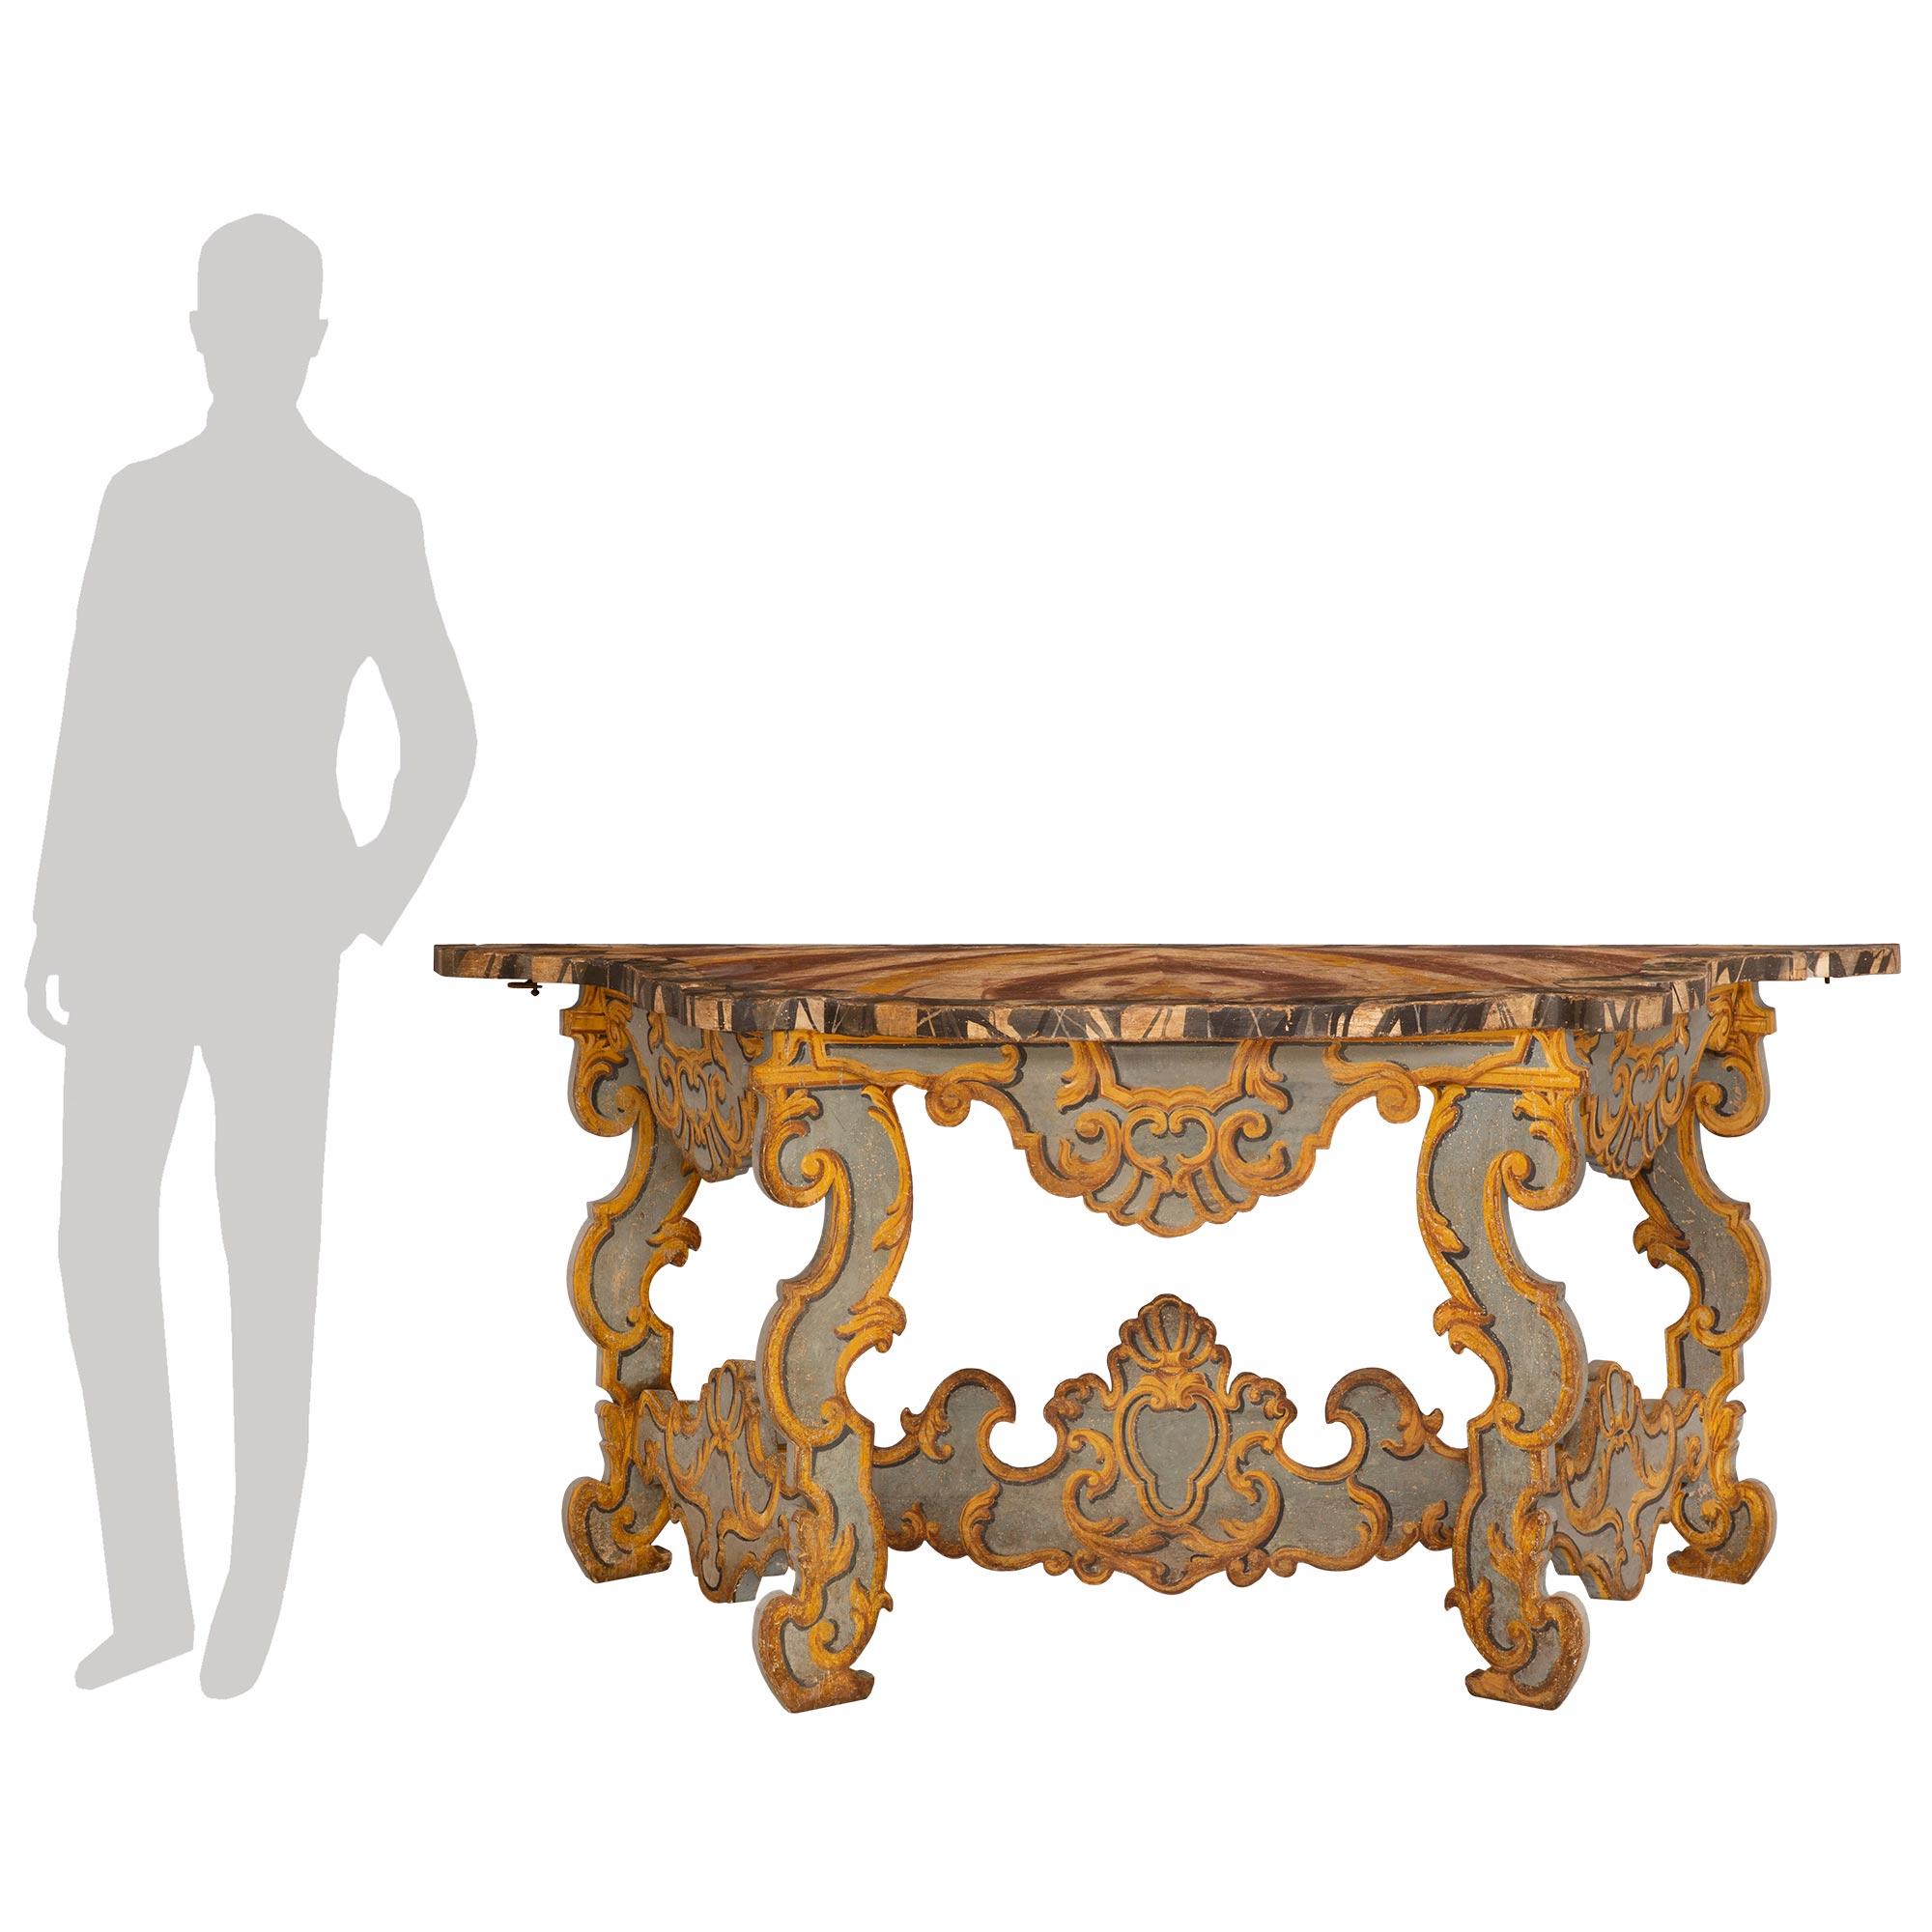 A sensational and elaborately decorated pair of Italian early 18th century Baroque Period patinated wood consoles/center table. The freestanding consoles/center table are raised by four handsome scrolled patinated legs which are all joined by side